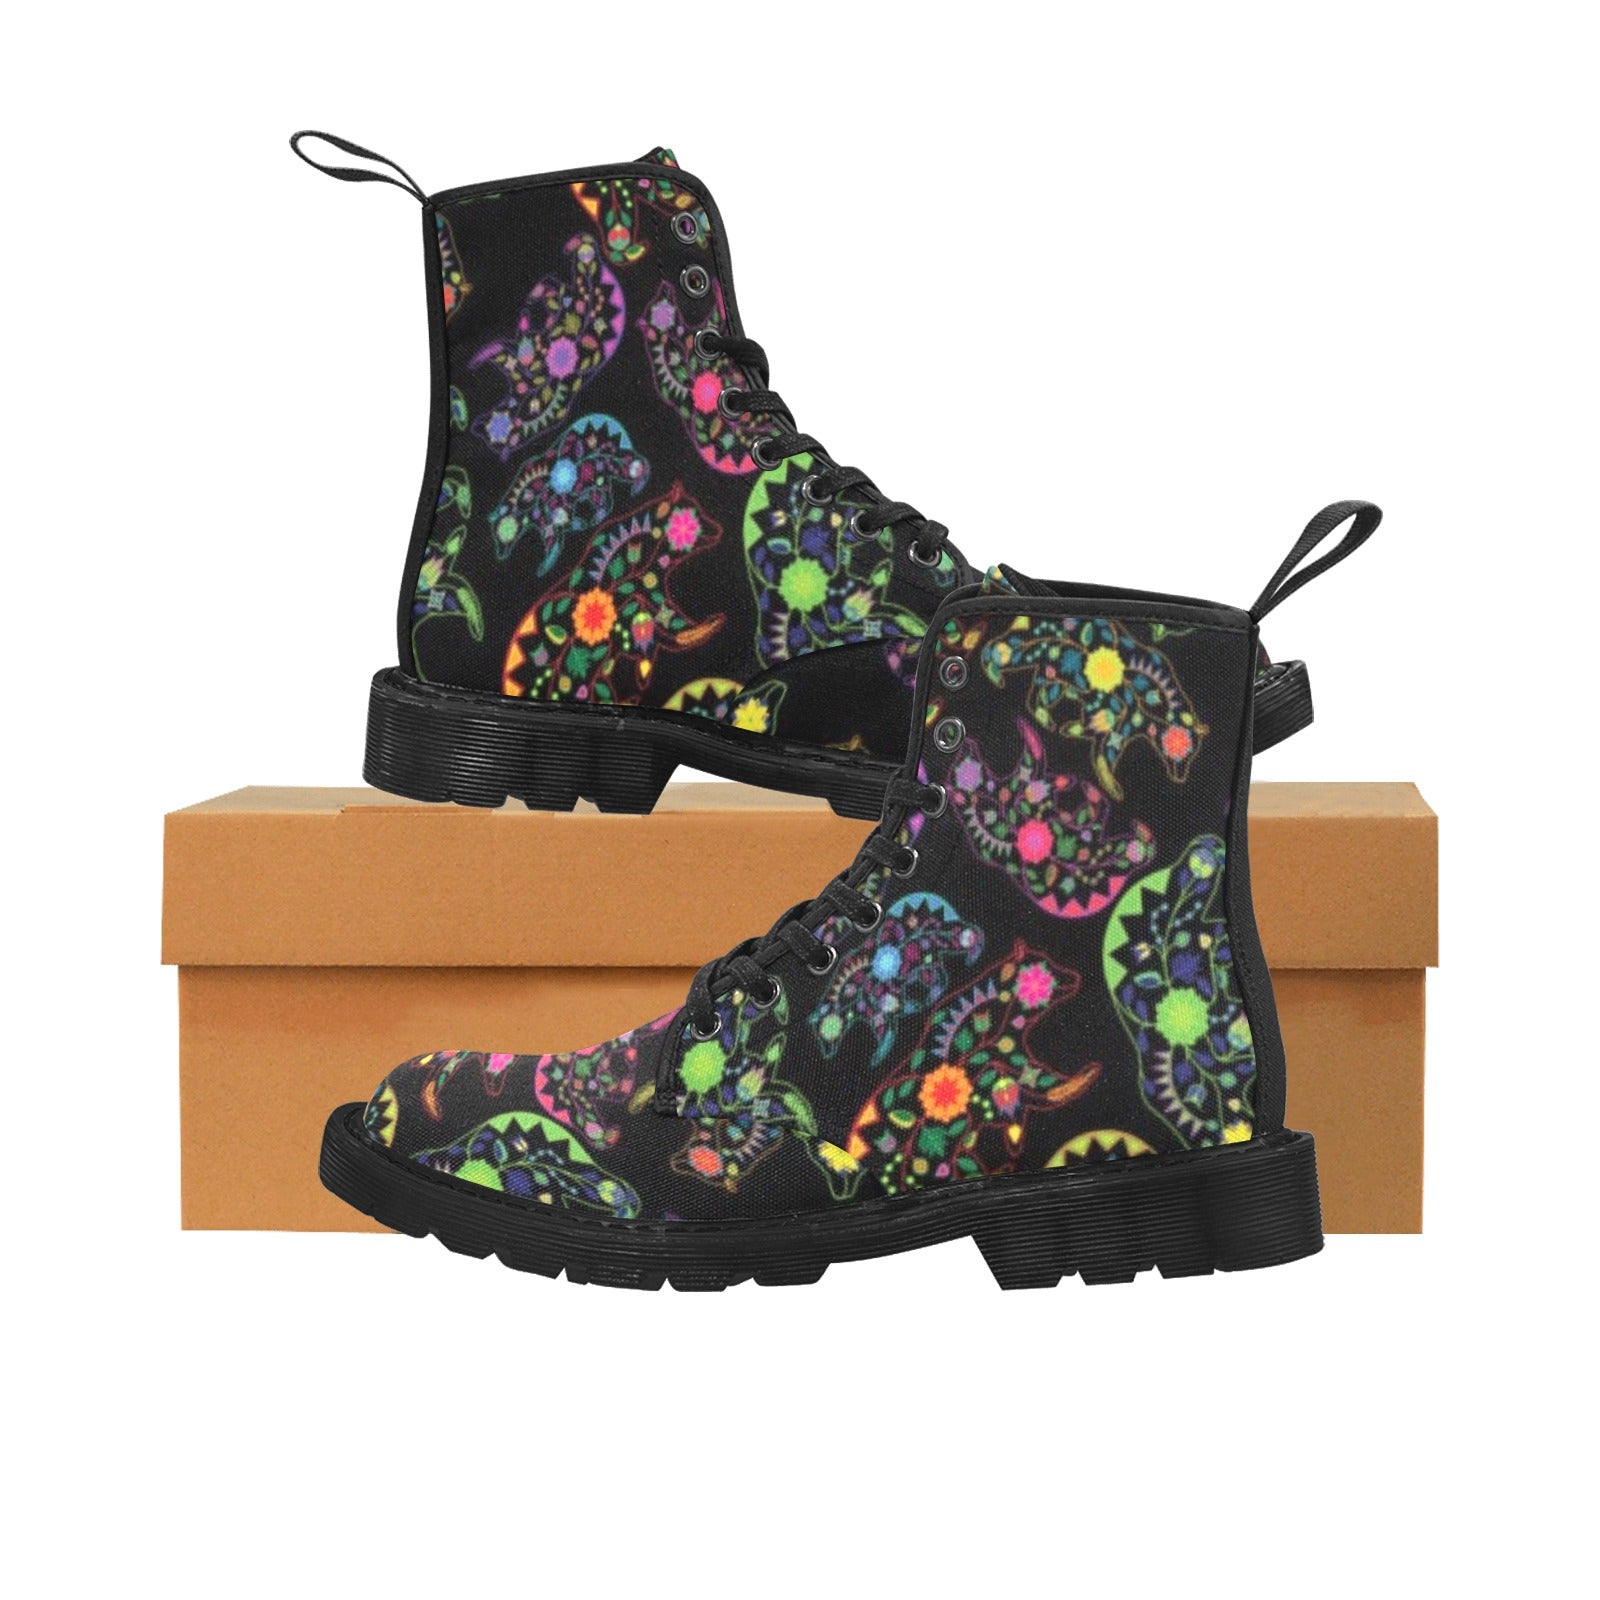 Neon Floral Bears Boots for Men (Black)